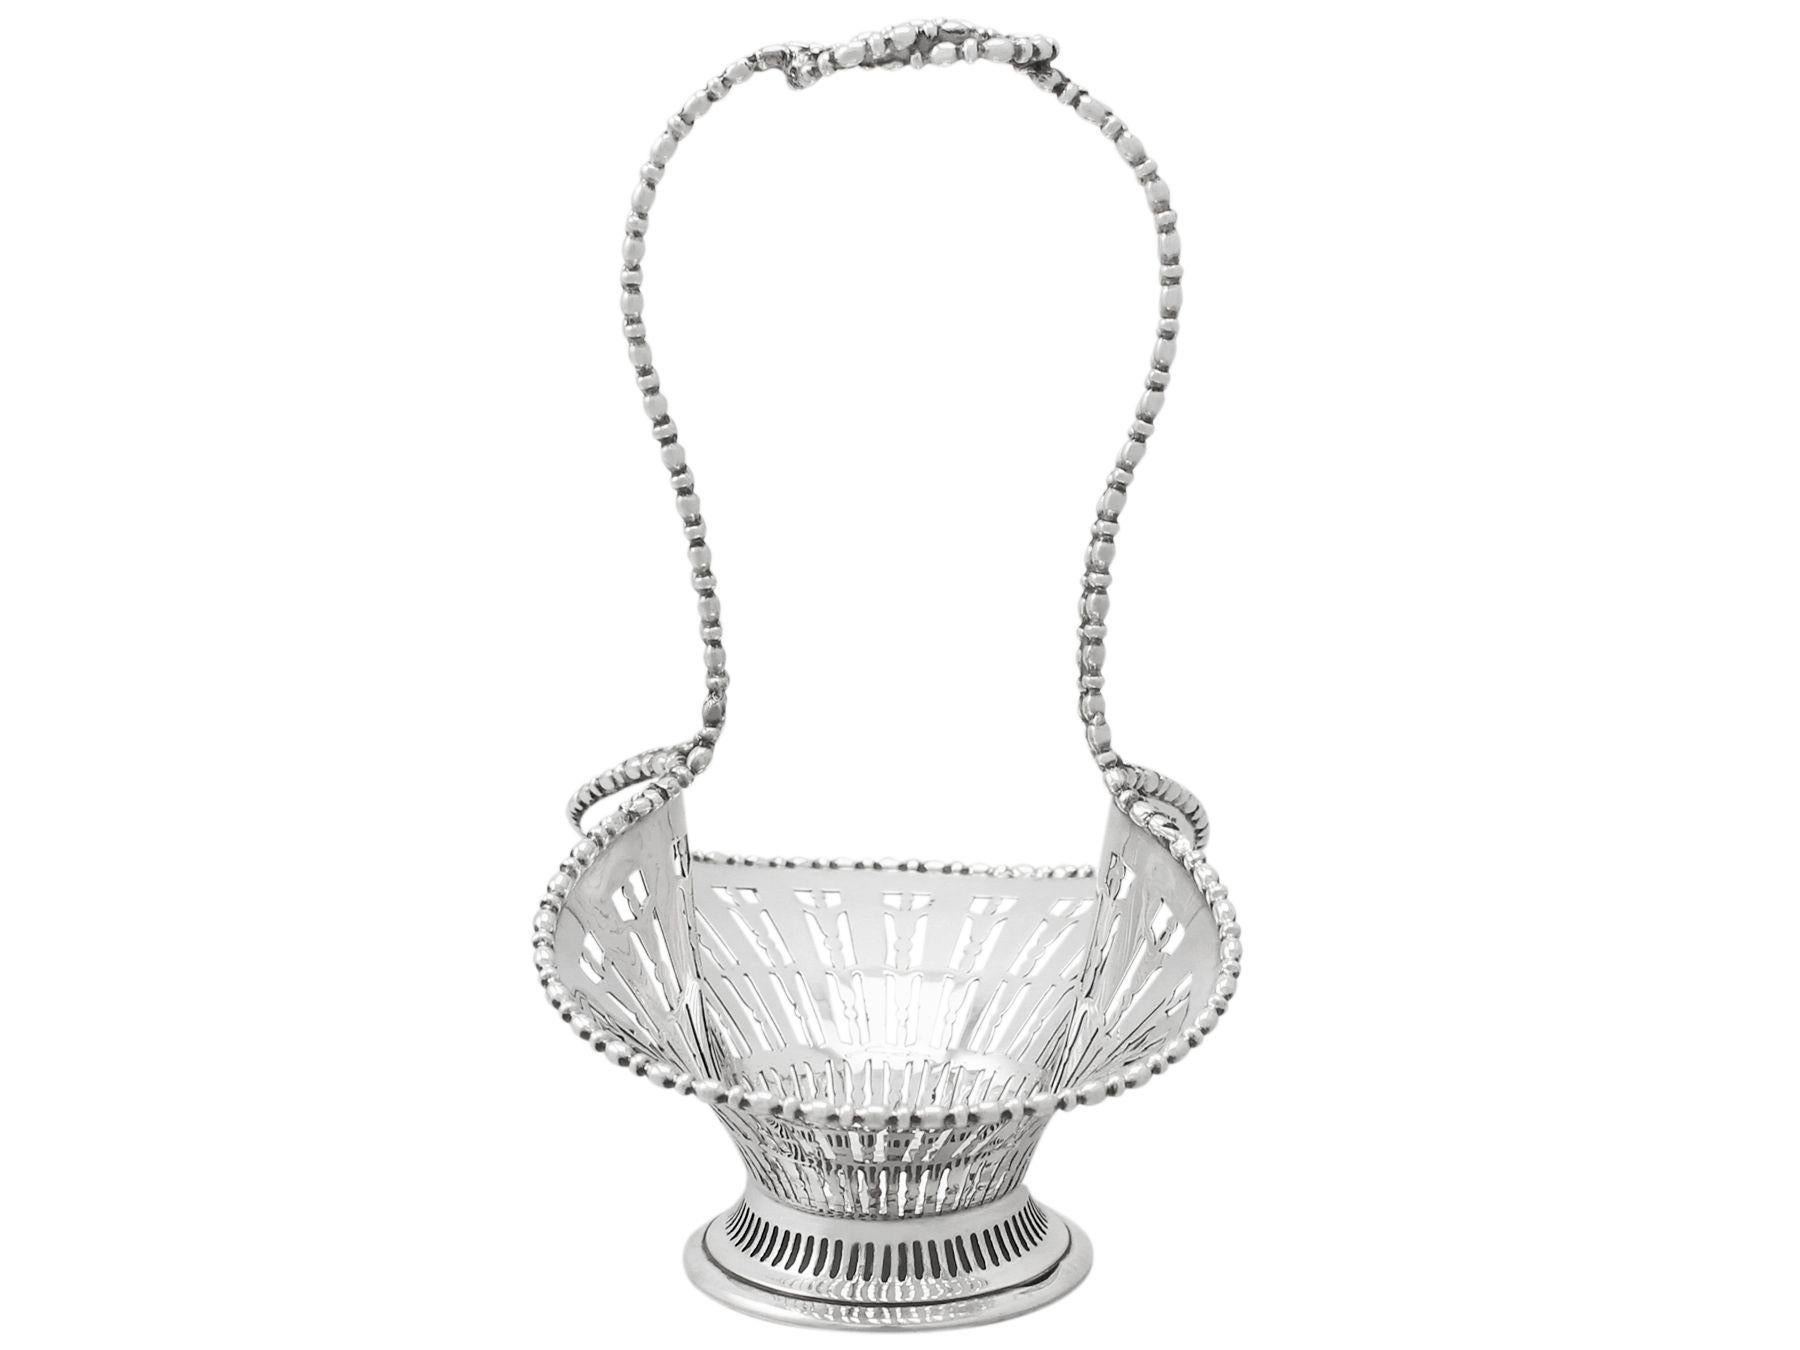 A fine and impressive antique Edwardian English sterling silver bon bon basket; an addition to our diverse ornamental silver collection.

This impressive antique Edwardian sterling silver bon bon basket has a flared waisted form onto a circular